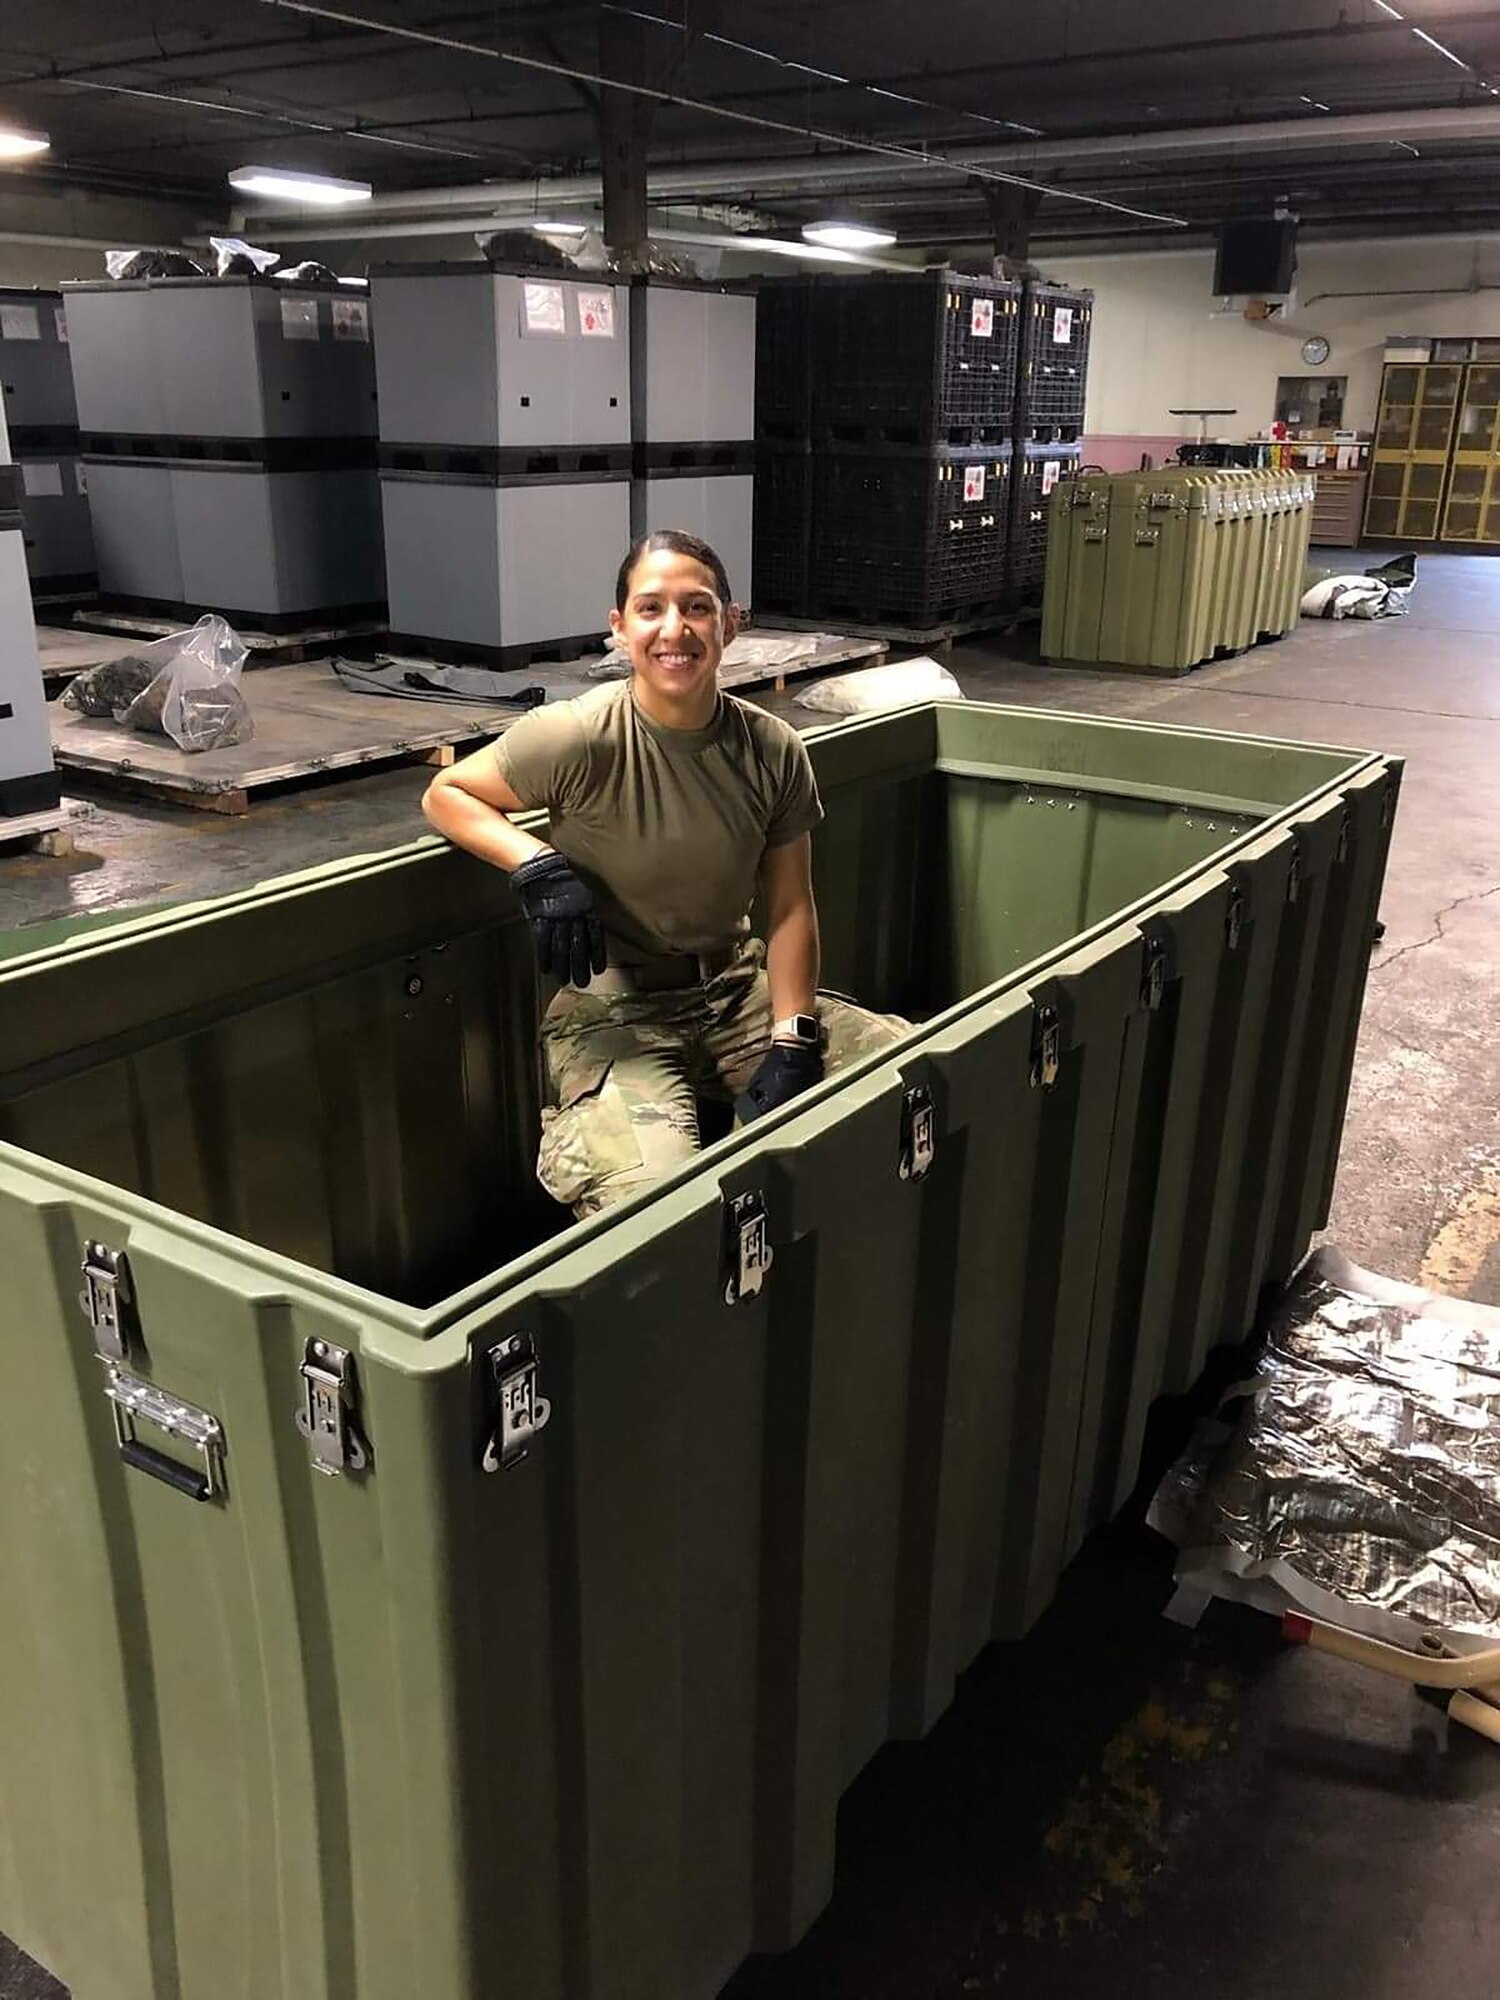 Staff Sgt. Jeanette Salgado, 445th Aeromedical Staging Squadron medical material journeyman, empties a bin of equipment for a week-long aeromedical and global patient movement exercise, Ultimate Caduceus, held at Wright-Patterson Air Force Base, Ohio, April 28, 2021.